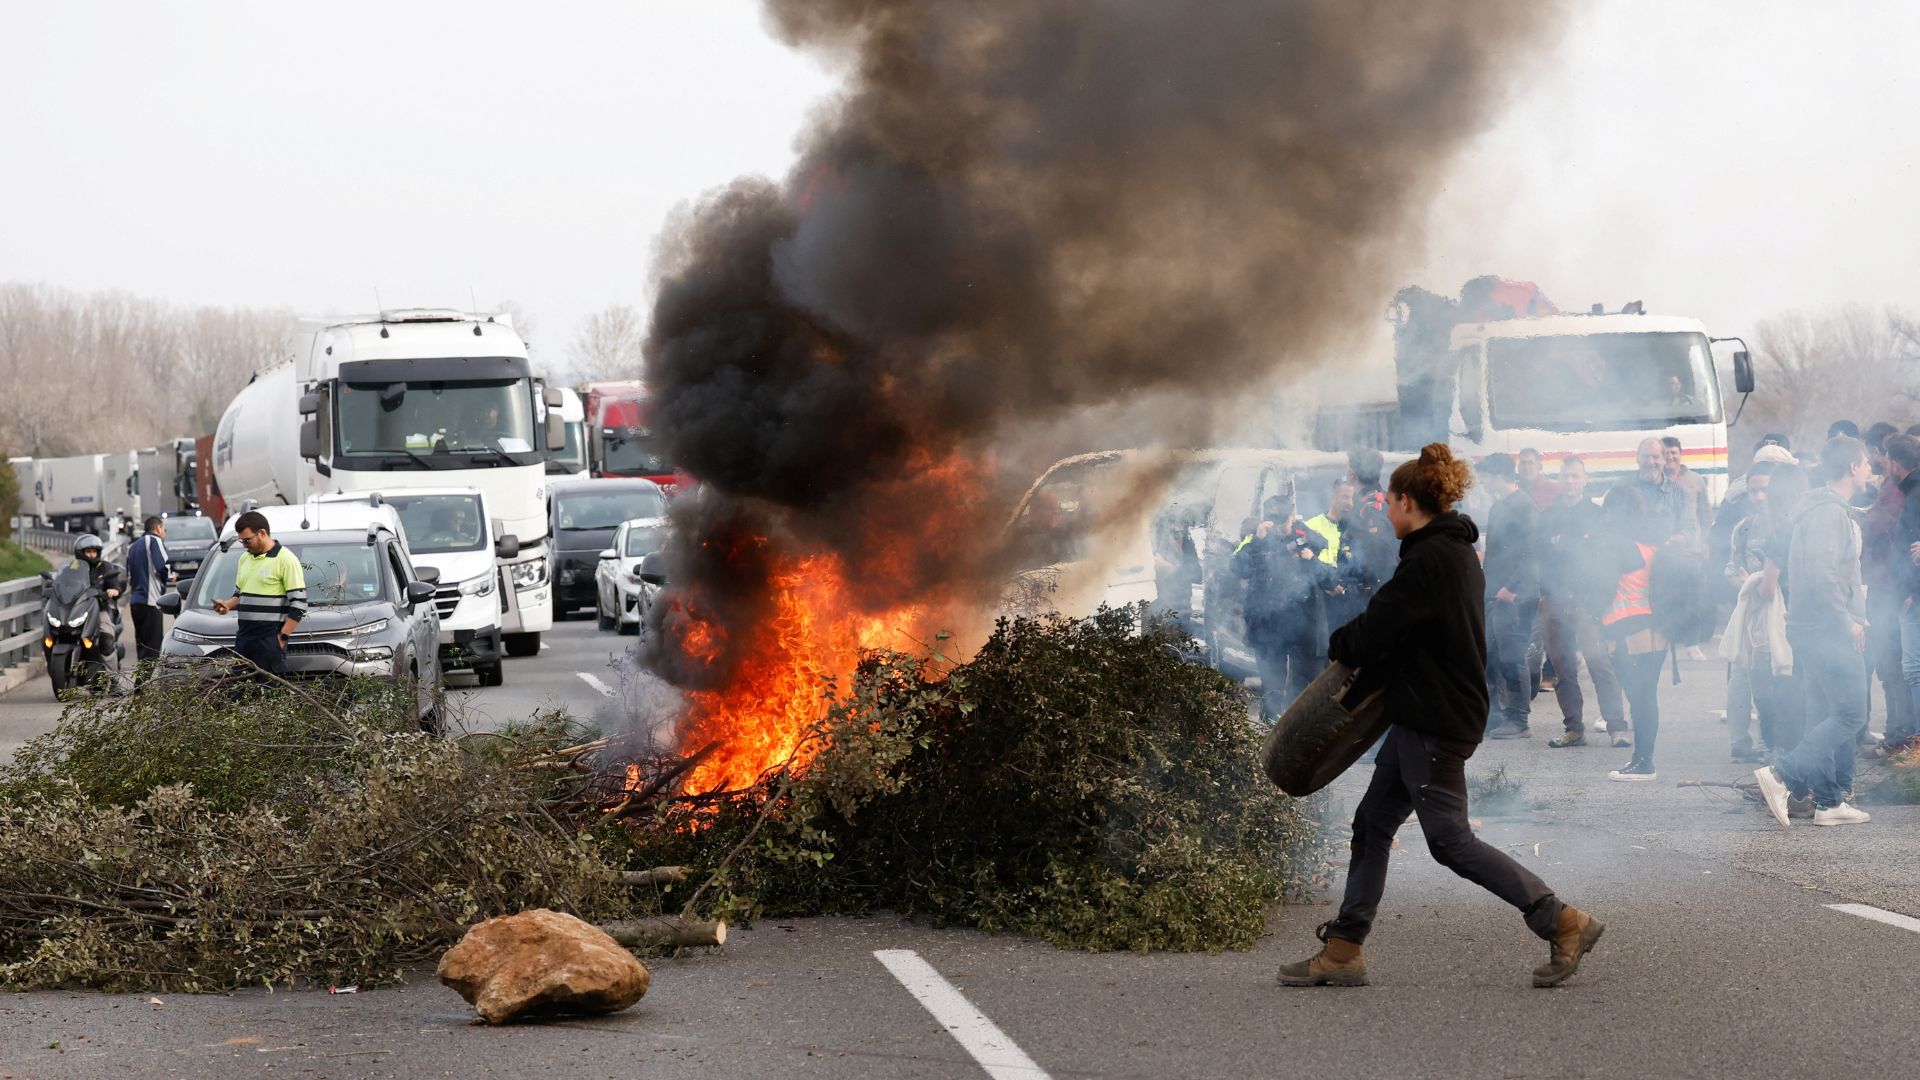 Tree branches are set on fire on a highway near Girona, Spain as farmers protest over price pressures, taxes and green regulation, grievances shared by farmers across Europe. /Albert Gea/Reuters